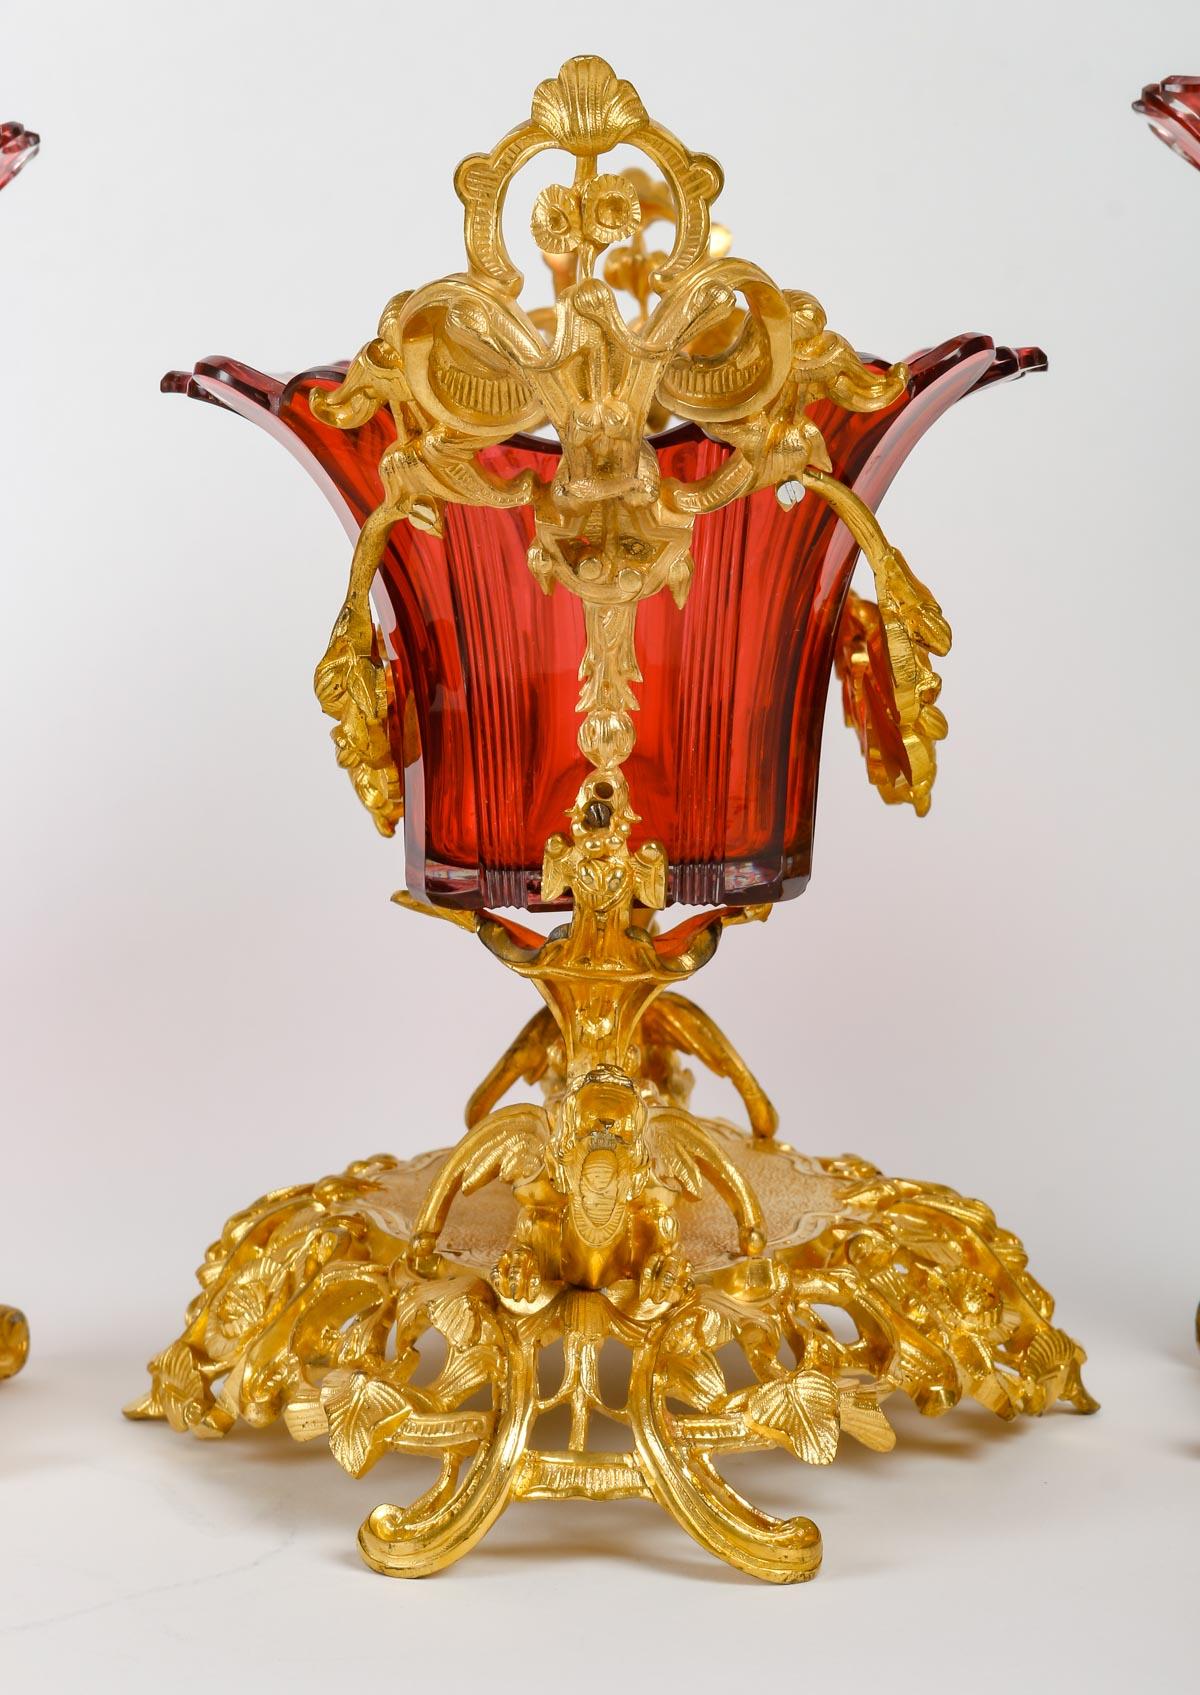 Napoleon III crystal set consisting of a bowl and two cornet vases.

Red cut Bohemian crystal set, gilded bronze frame composed of a bowl and two cornet vases, 19th century, Napoleon III period.

dimensions : 
Bowl: h: 29cm, w: 37cm, d: 23cm
Cornet: